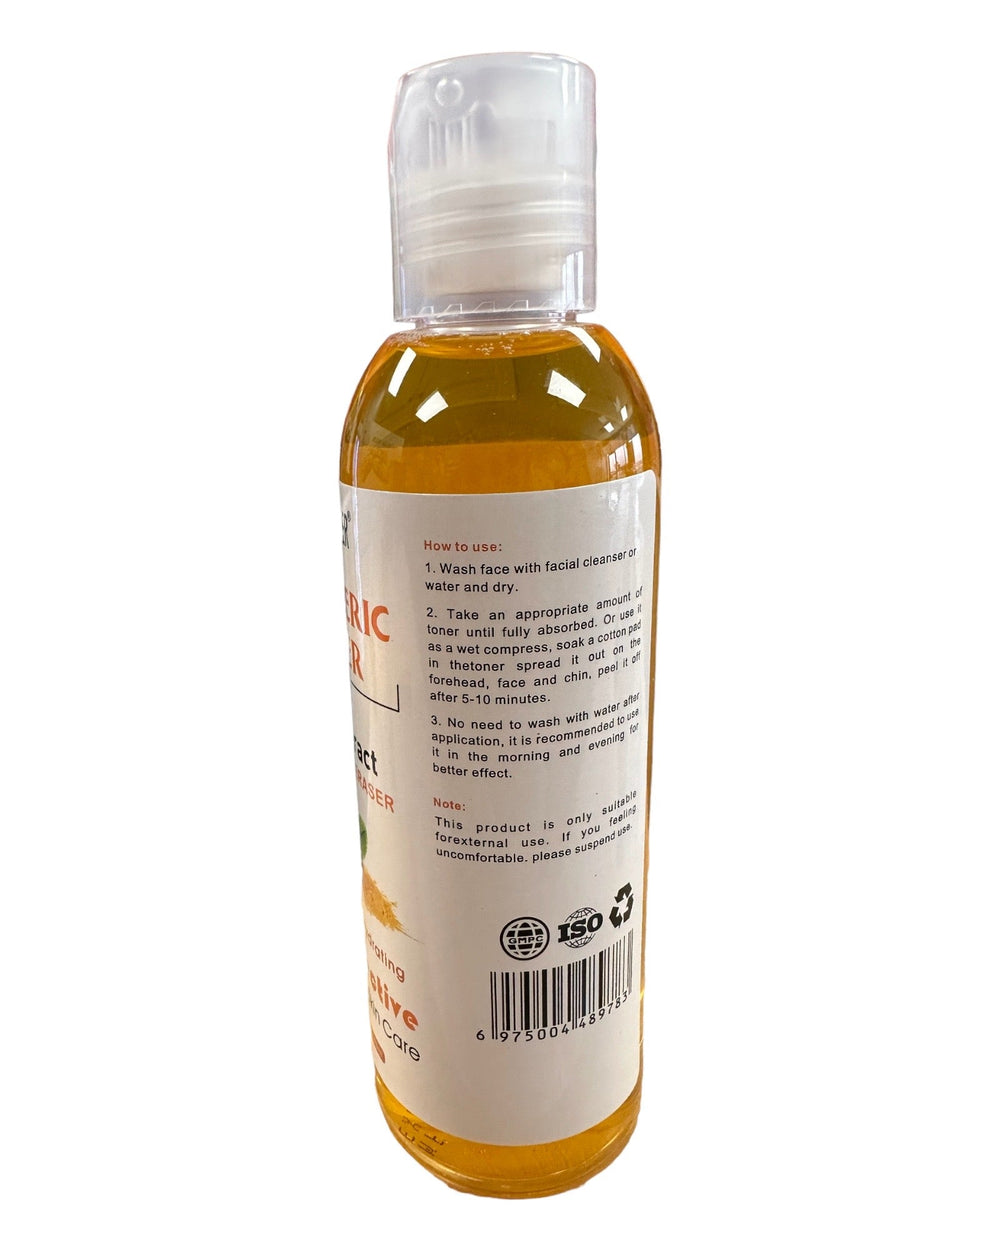 Tumeric Skin Toner - Tailor Made Herbal Products